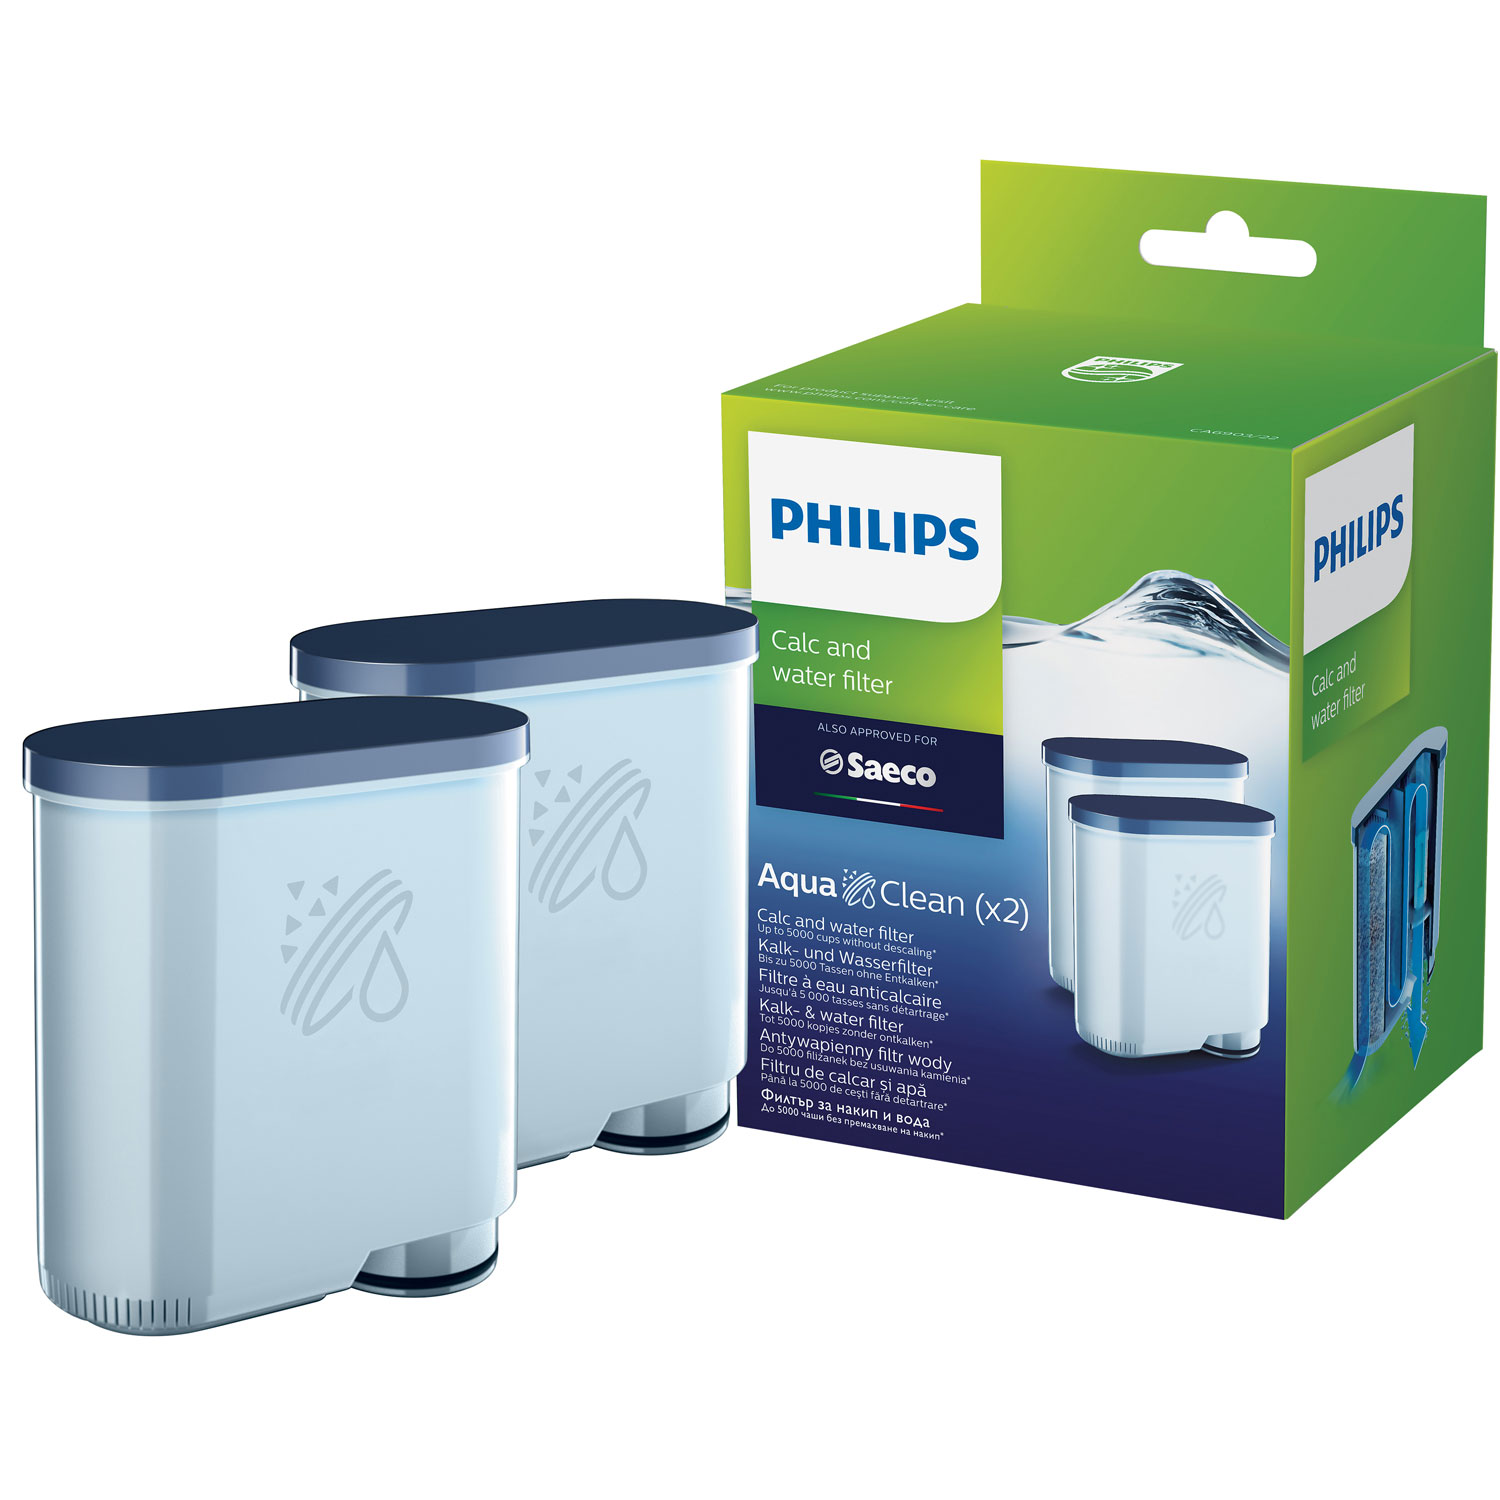 Philips AquaClean Calc and Water Filter (CA6903/22) - 2 Pack